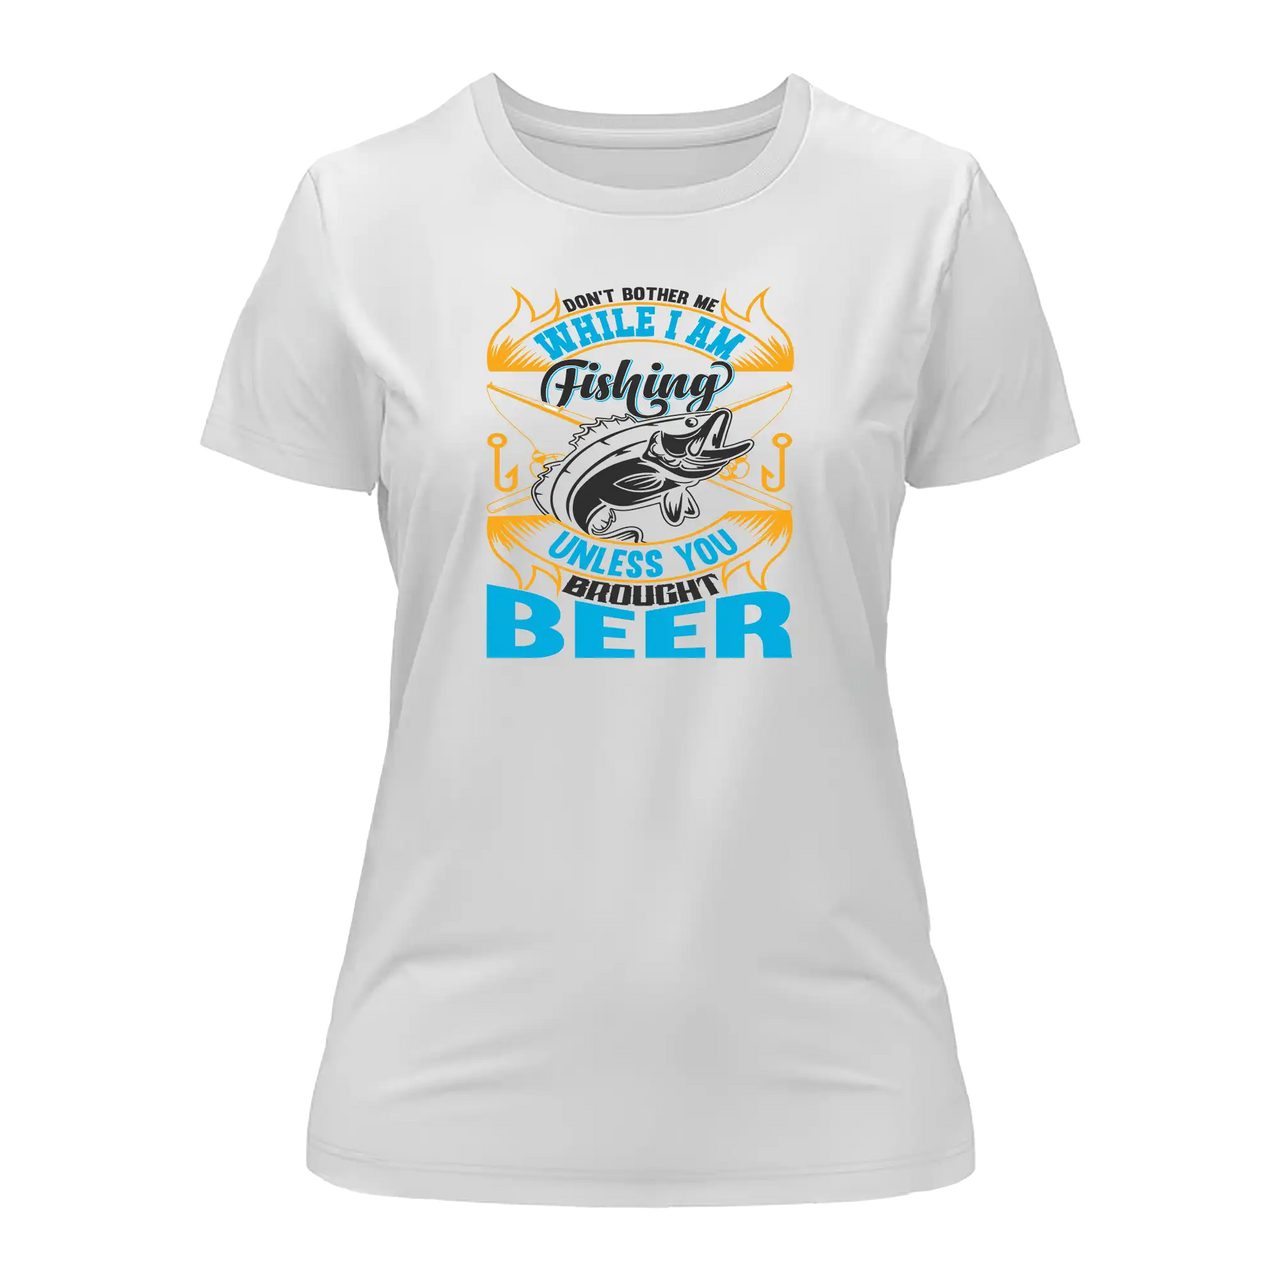 Don't Bother Me While I'm Fishing T-Shirt for Women